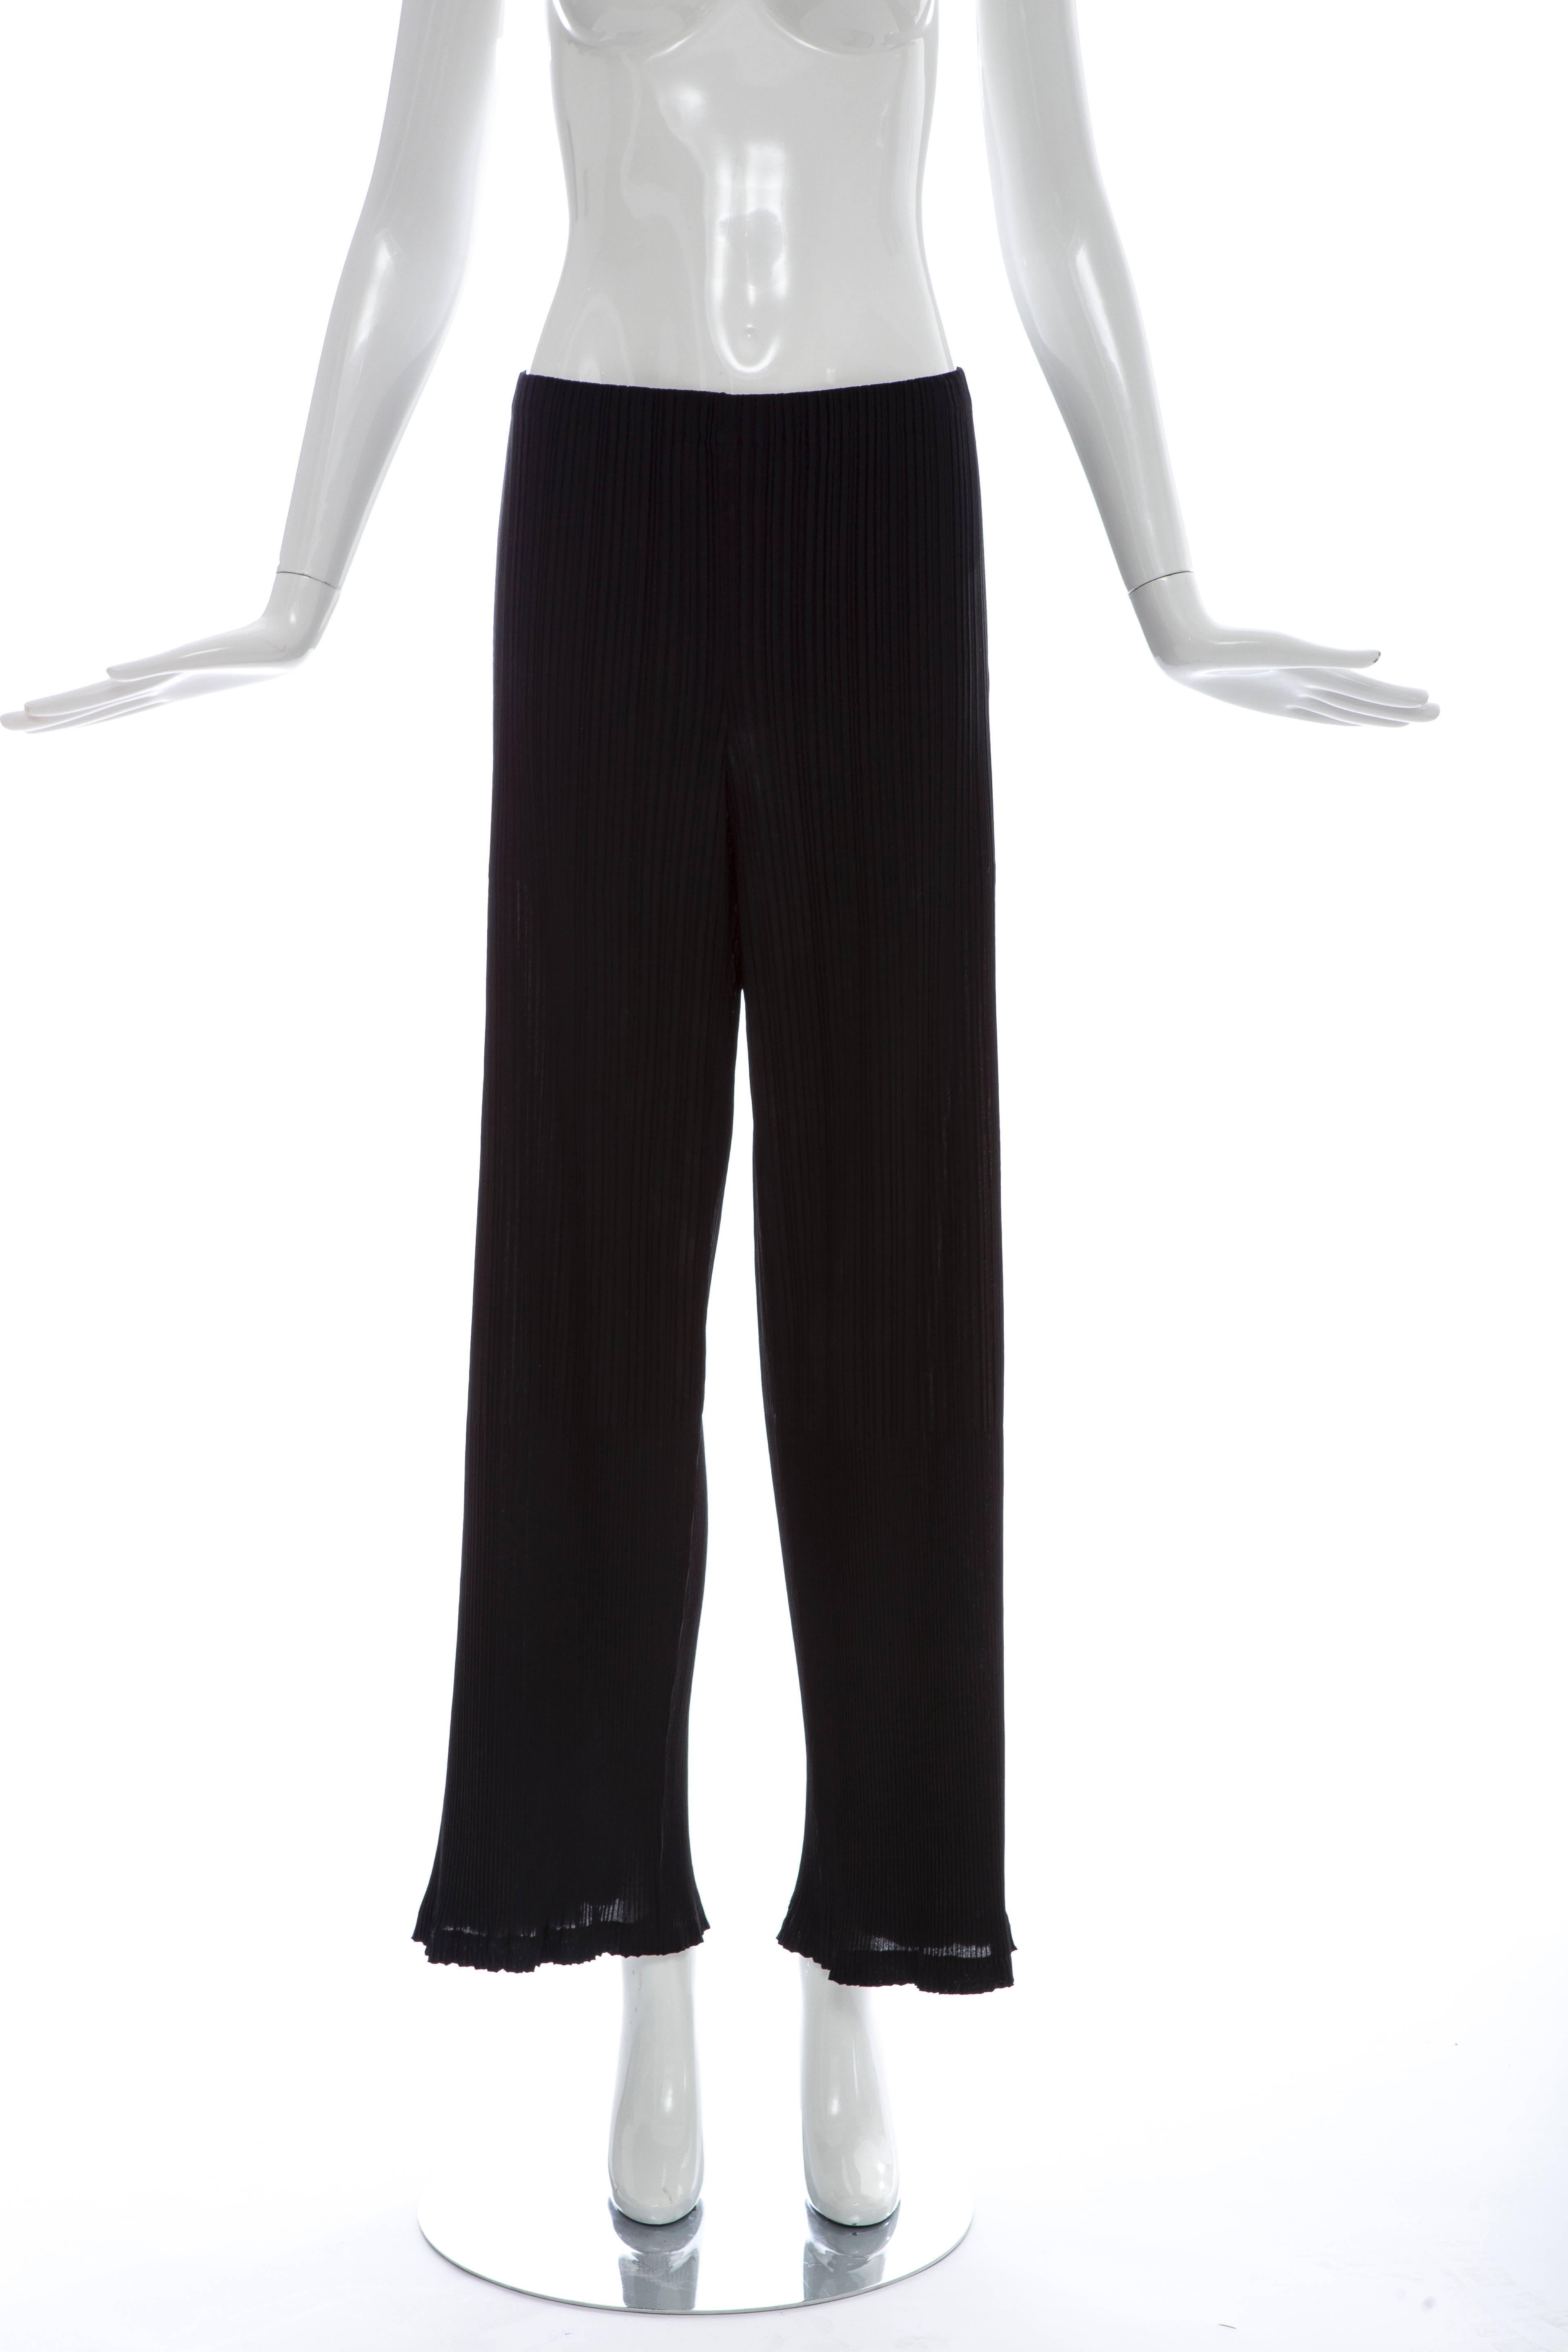 Issey Miyake Black Pleated Polyester Button Front Pant Suit, Circa 1990's For Sale 4